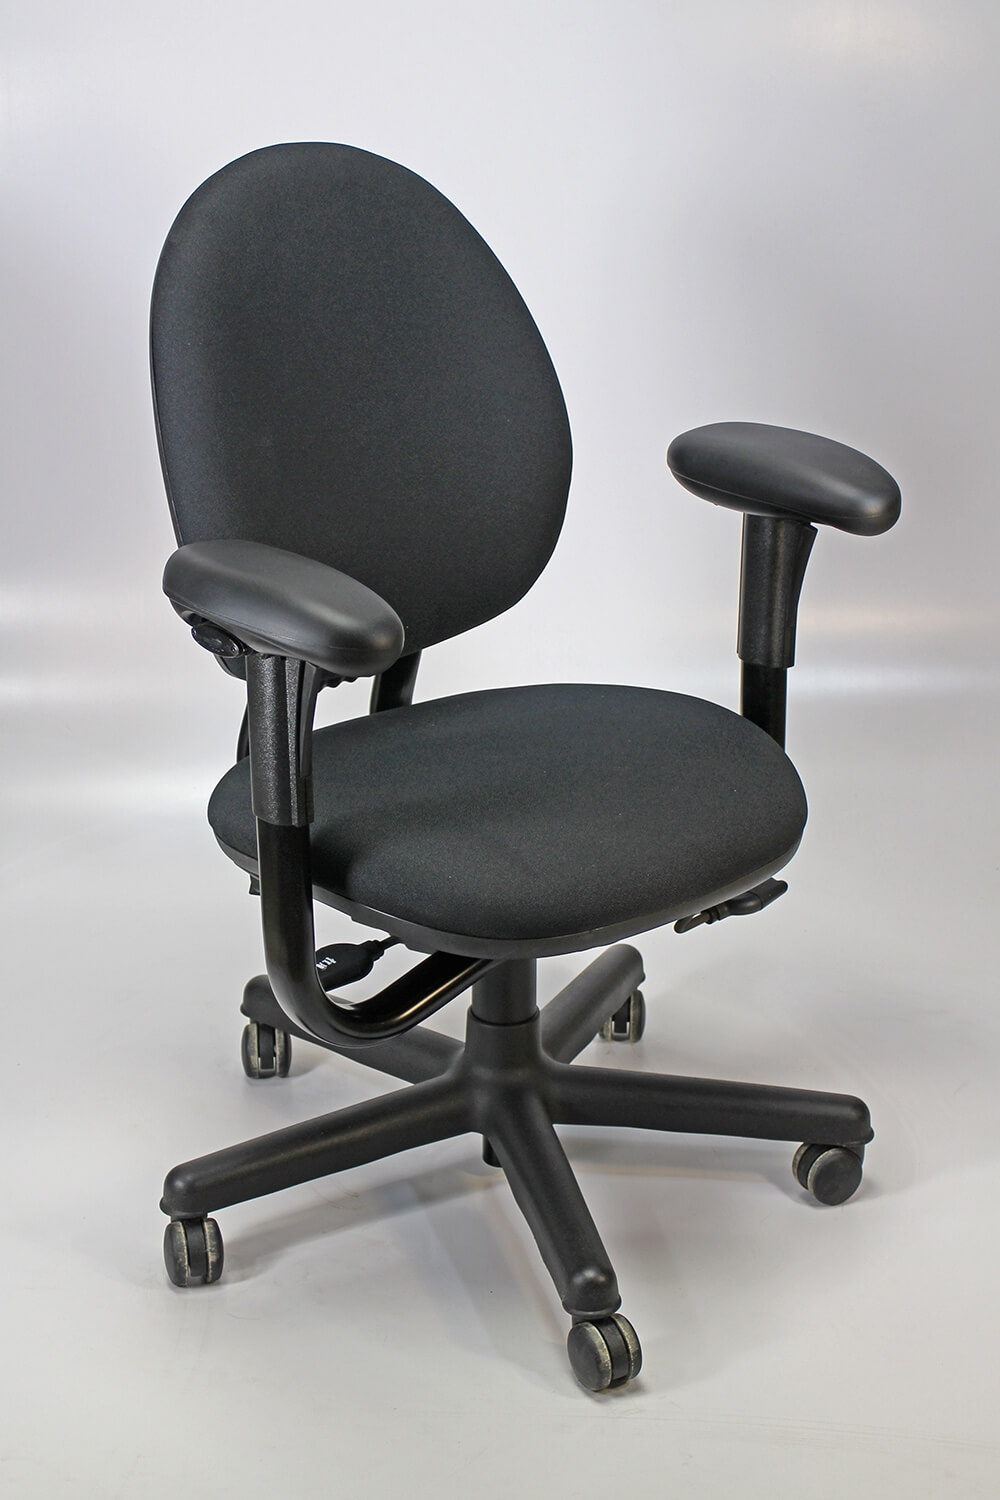 Steelcase chairs steelcase criterion chair